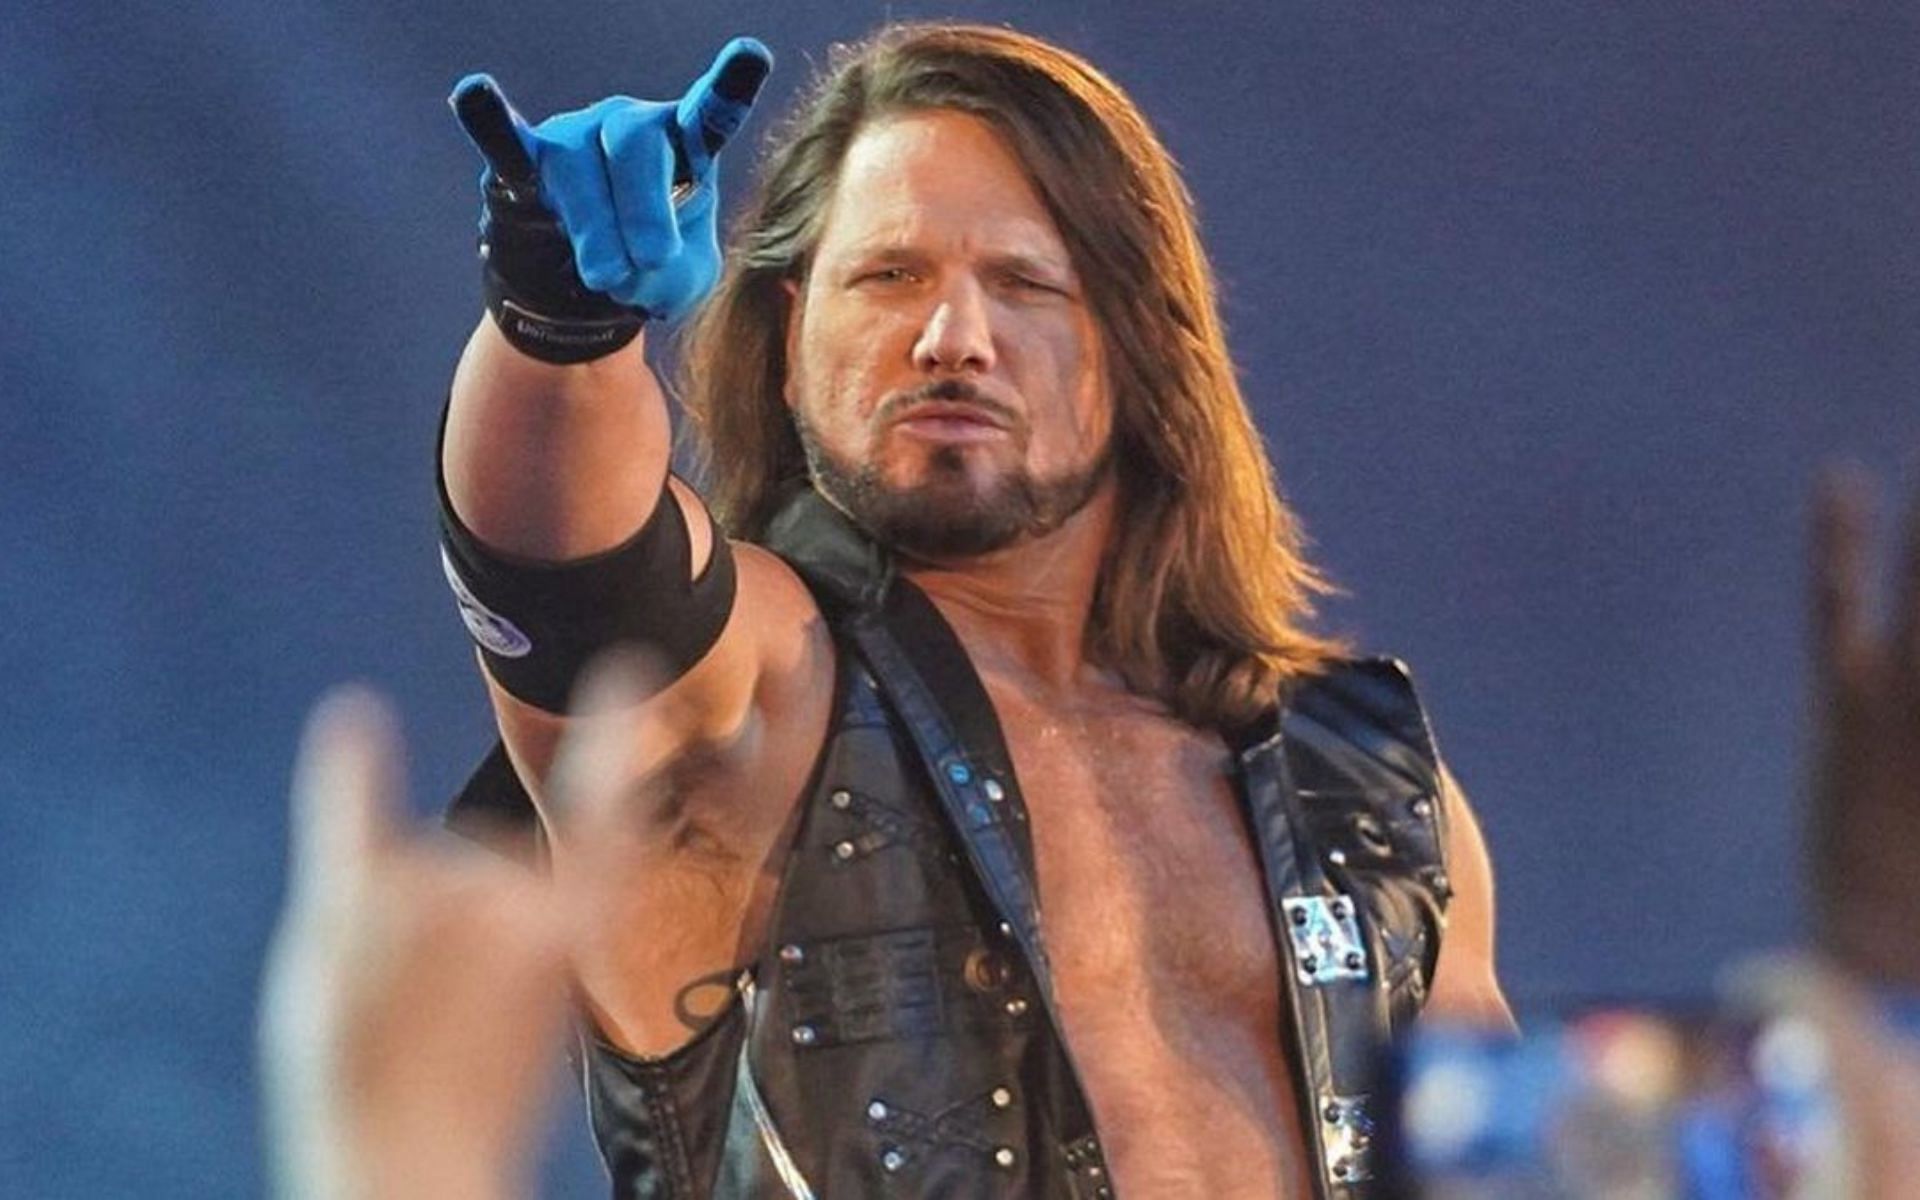 Former WWE Champion AJ Styles is a veteran of the industry